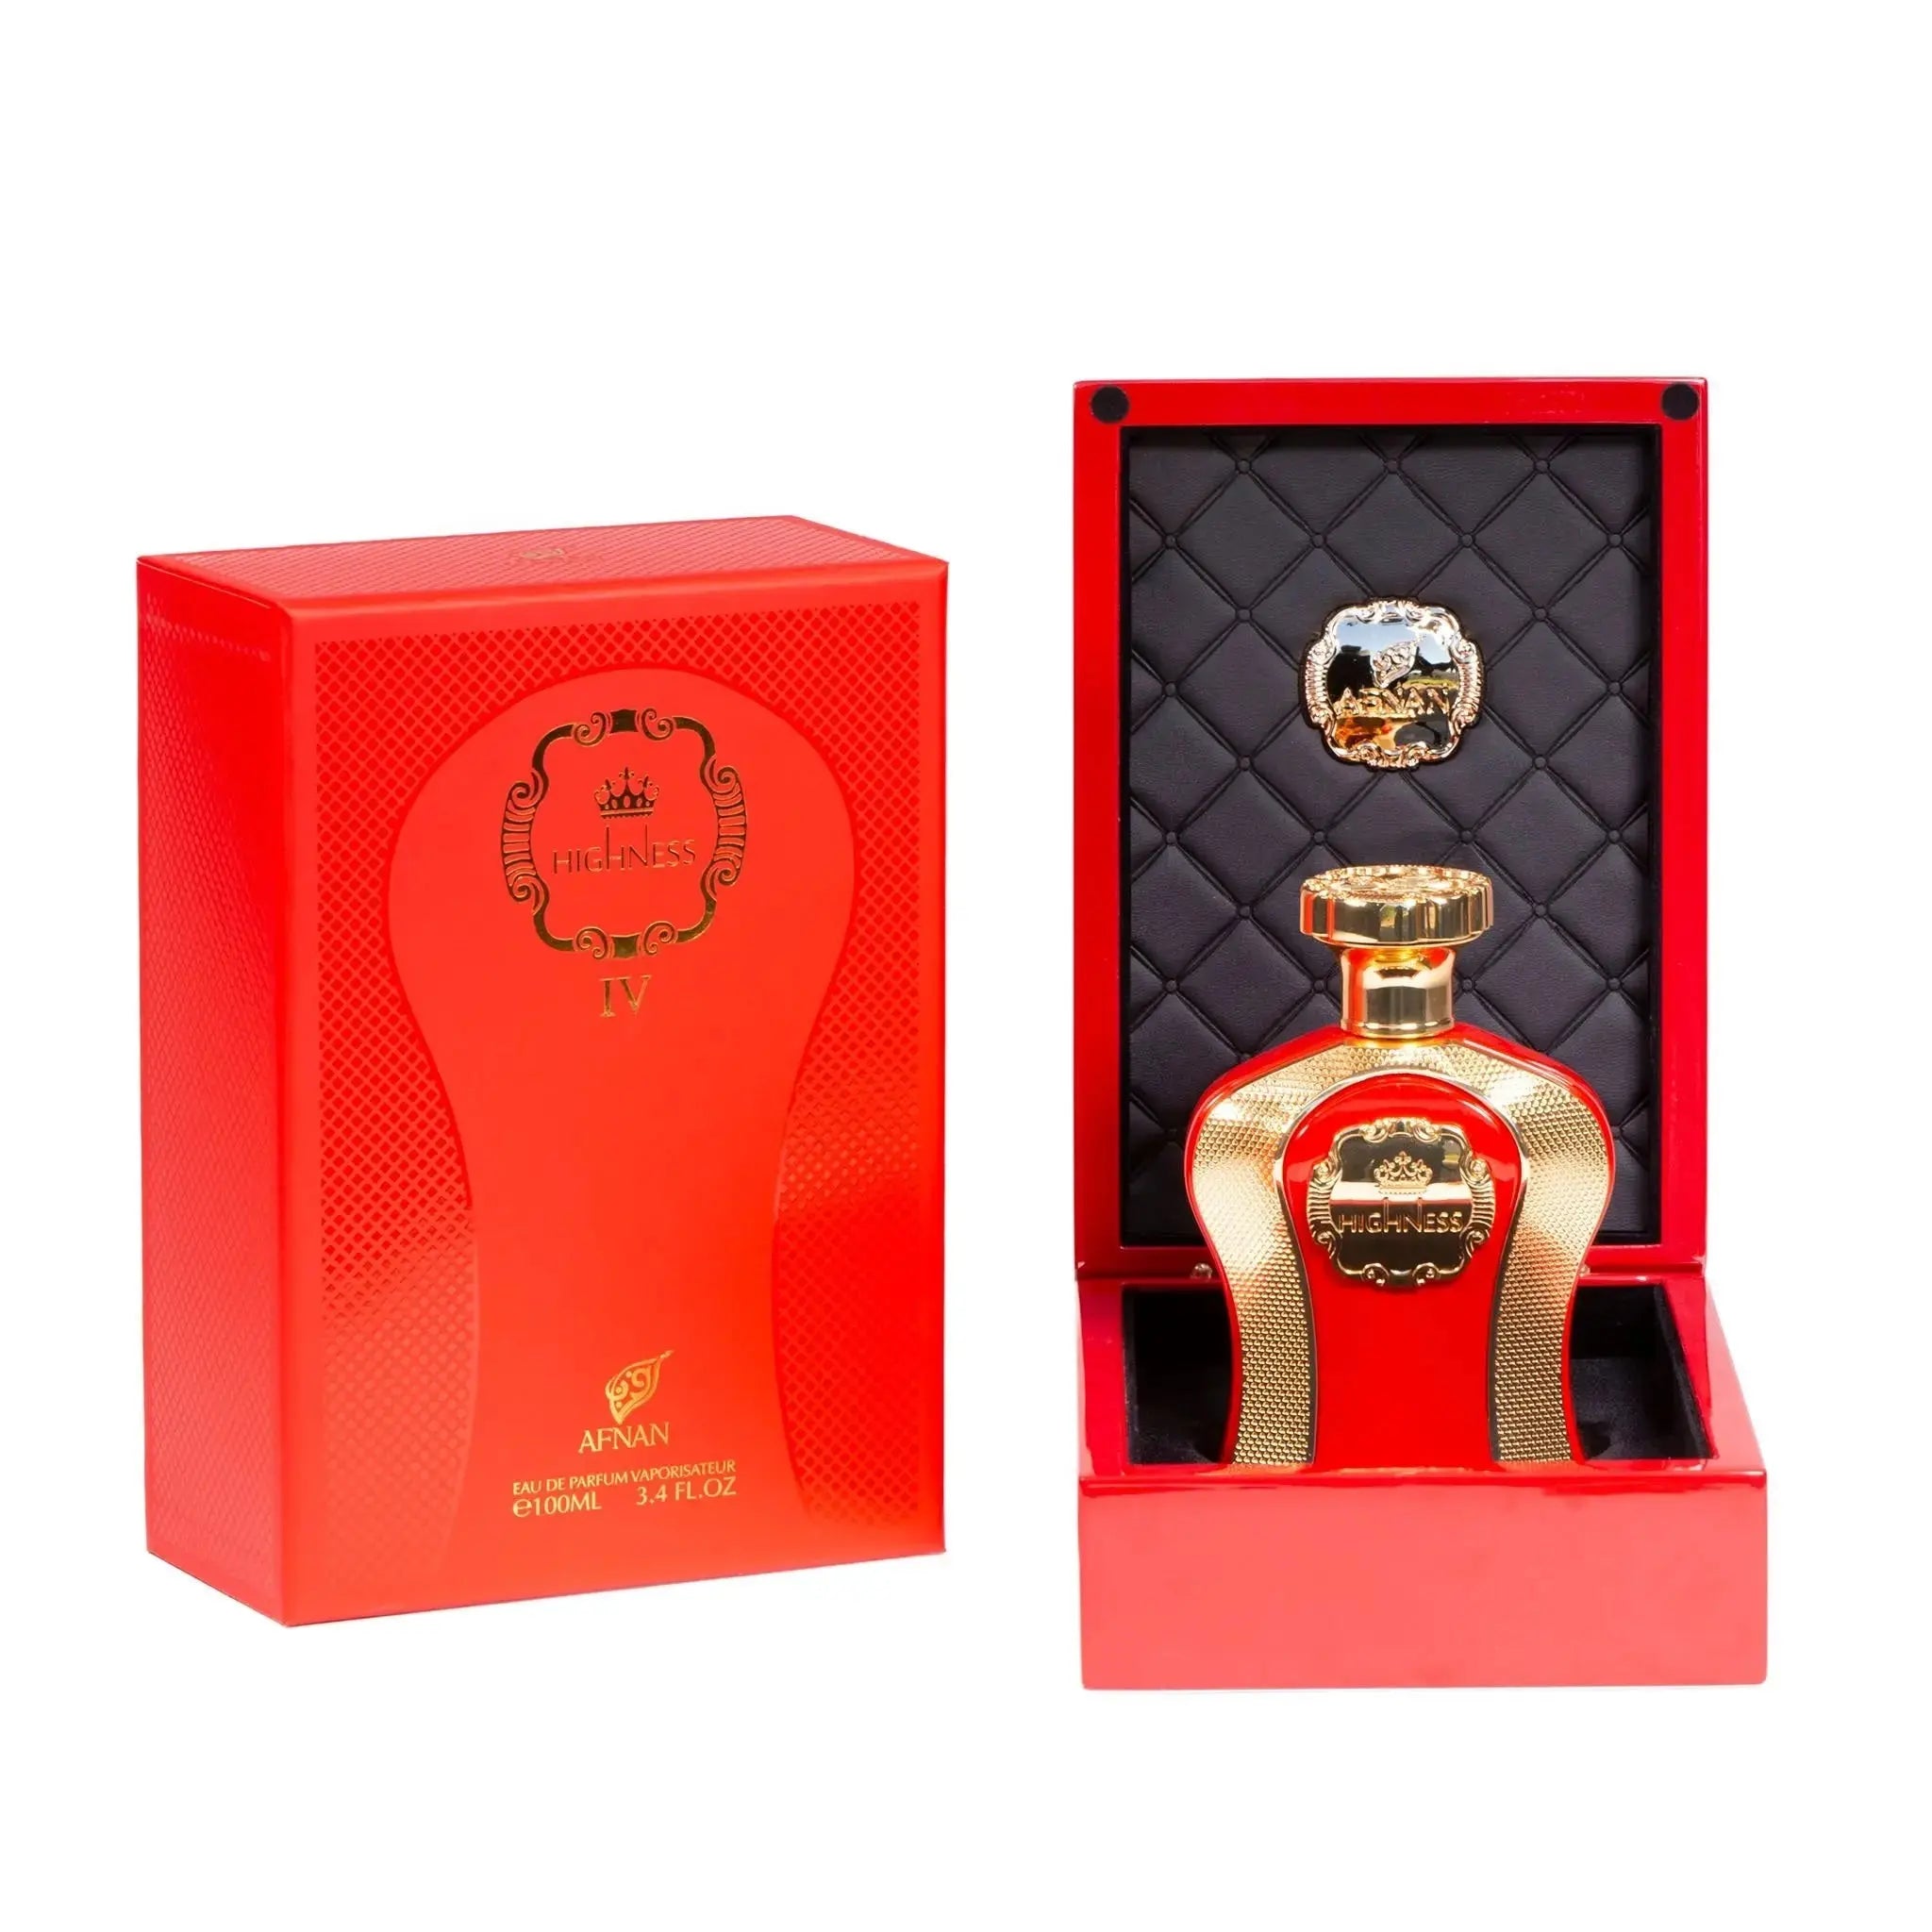  The image displays a luxurious perfume set, "Highness Red IV" by Afnan Perfumes. It features an ornate golden bottle with a crown-like cap and a red label with the brand's emblem, presented in an elegant red box with a textured pattern. The box is open, revealing a rich, black interior with a quilted pattern and the perfume bottle snugly fitted inside, highlighting the item's exclusivity and premium quality. The combination of red and gold signifies opulence and sophistication.